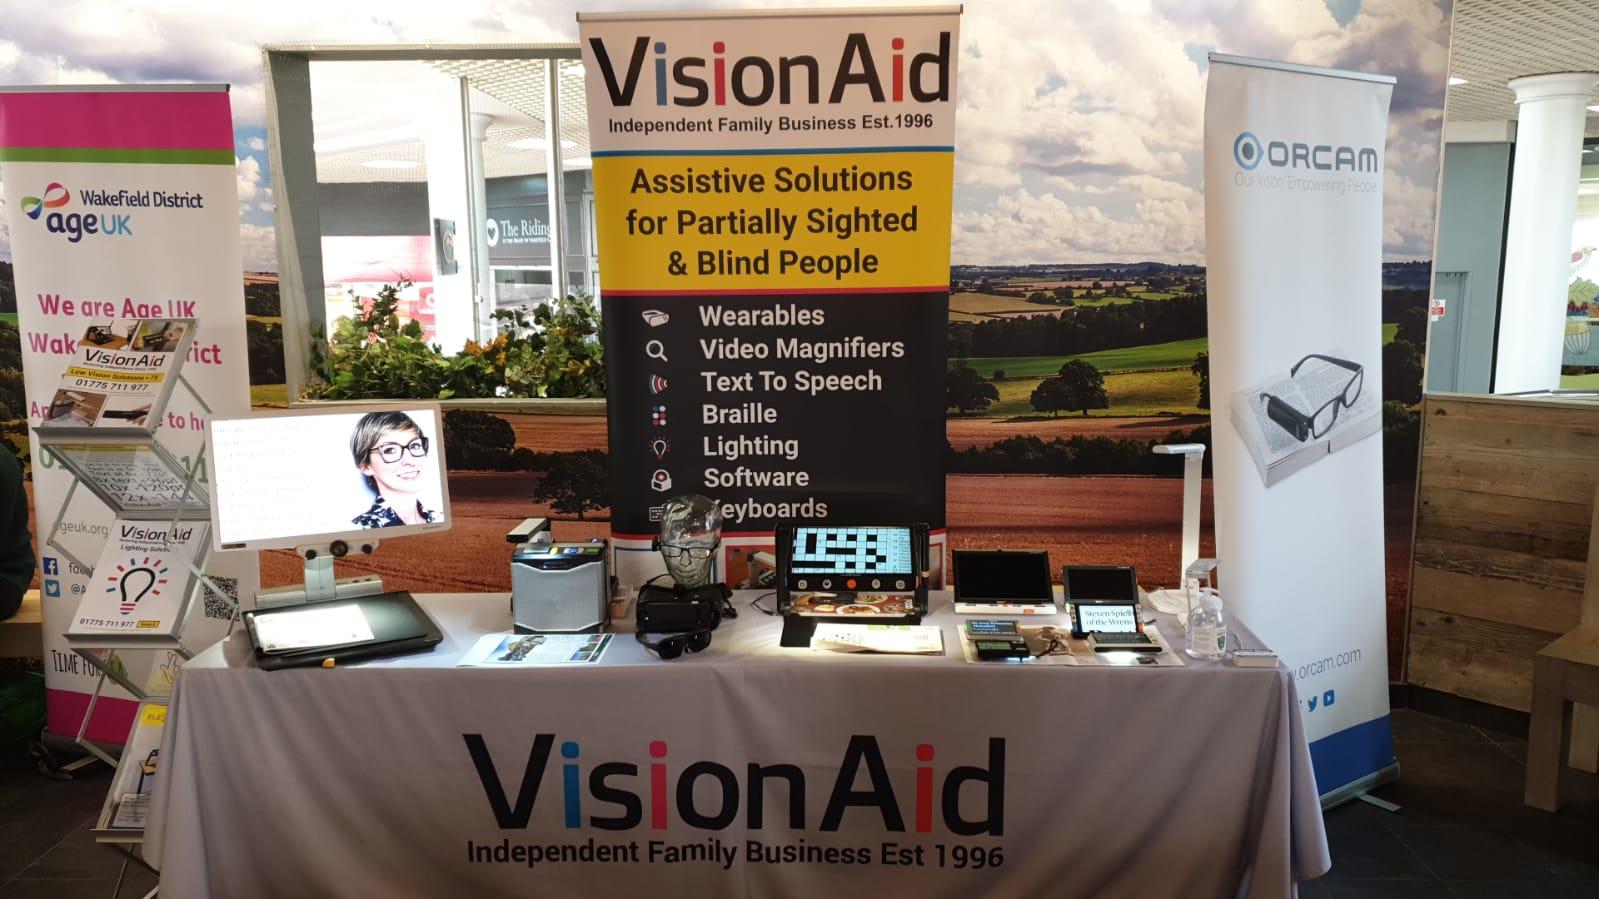 Image shows a table with a selection of our low vision and blindness solutions behind the table there is a visionaid and orcam banner to th eleft side of the table is a stand full of our brochures